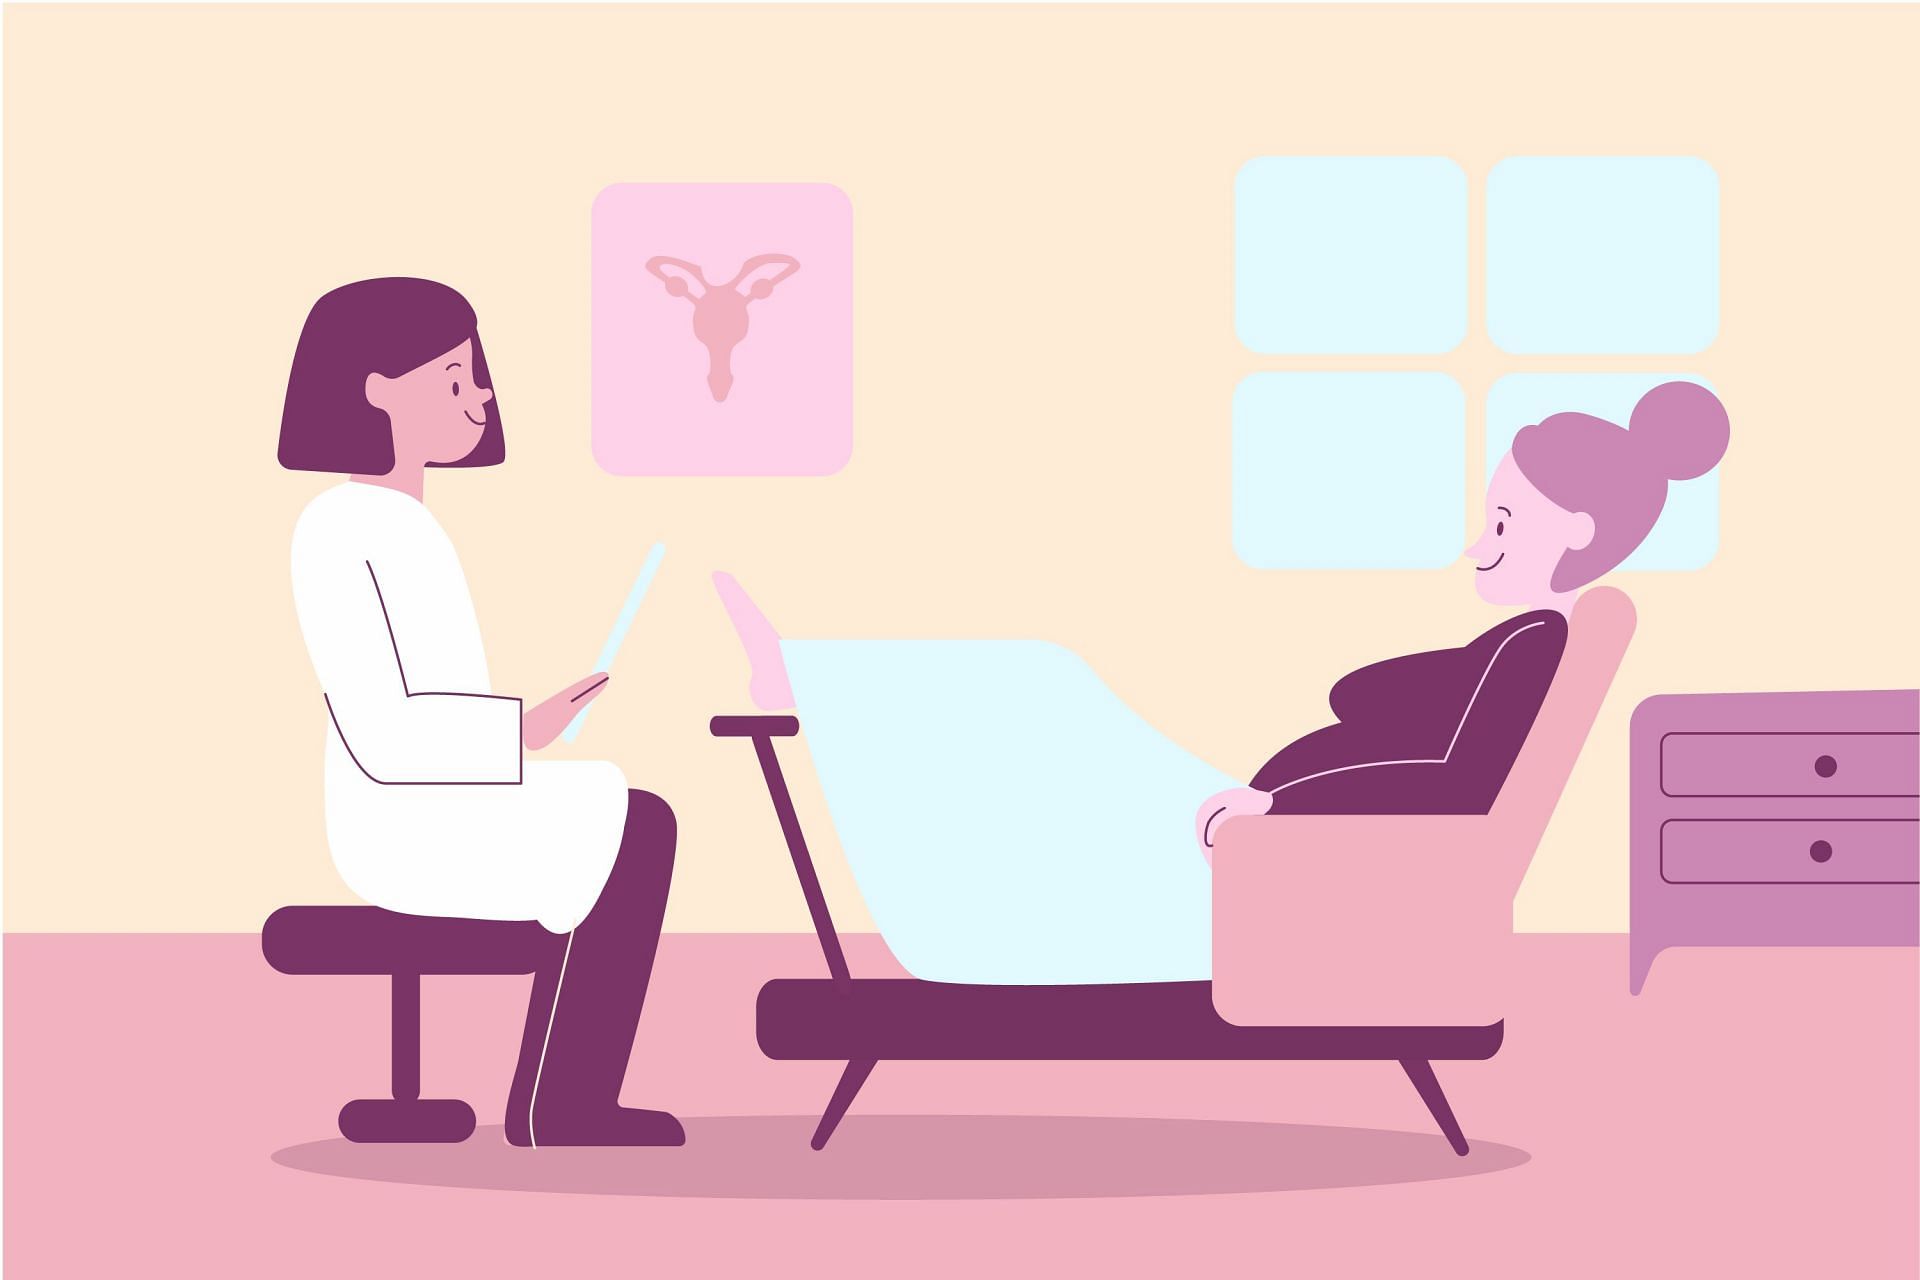 Stay in touch with a professional who can guide your journey to manage anxiety during pregnancy. (Image via Freepik/ Freepik)